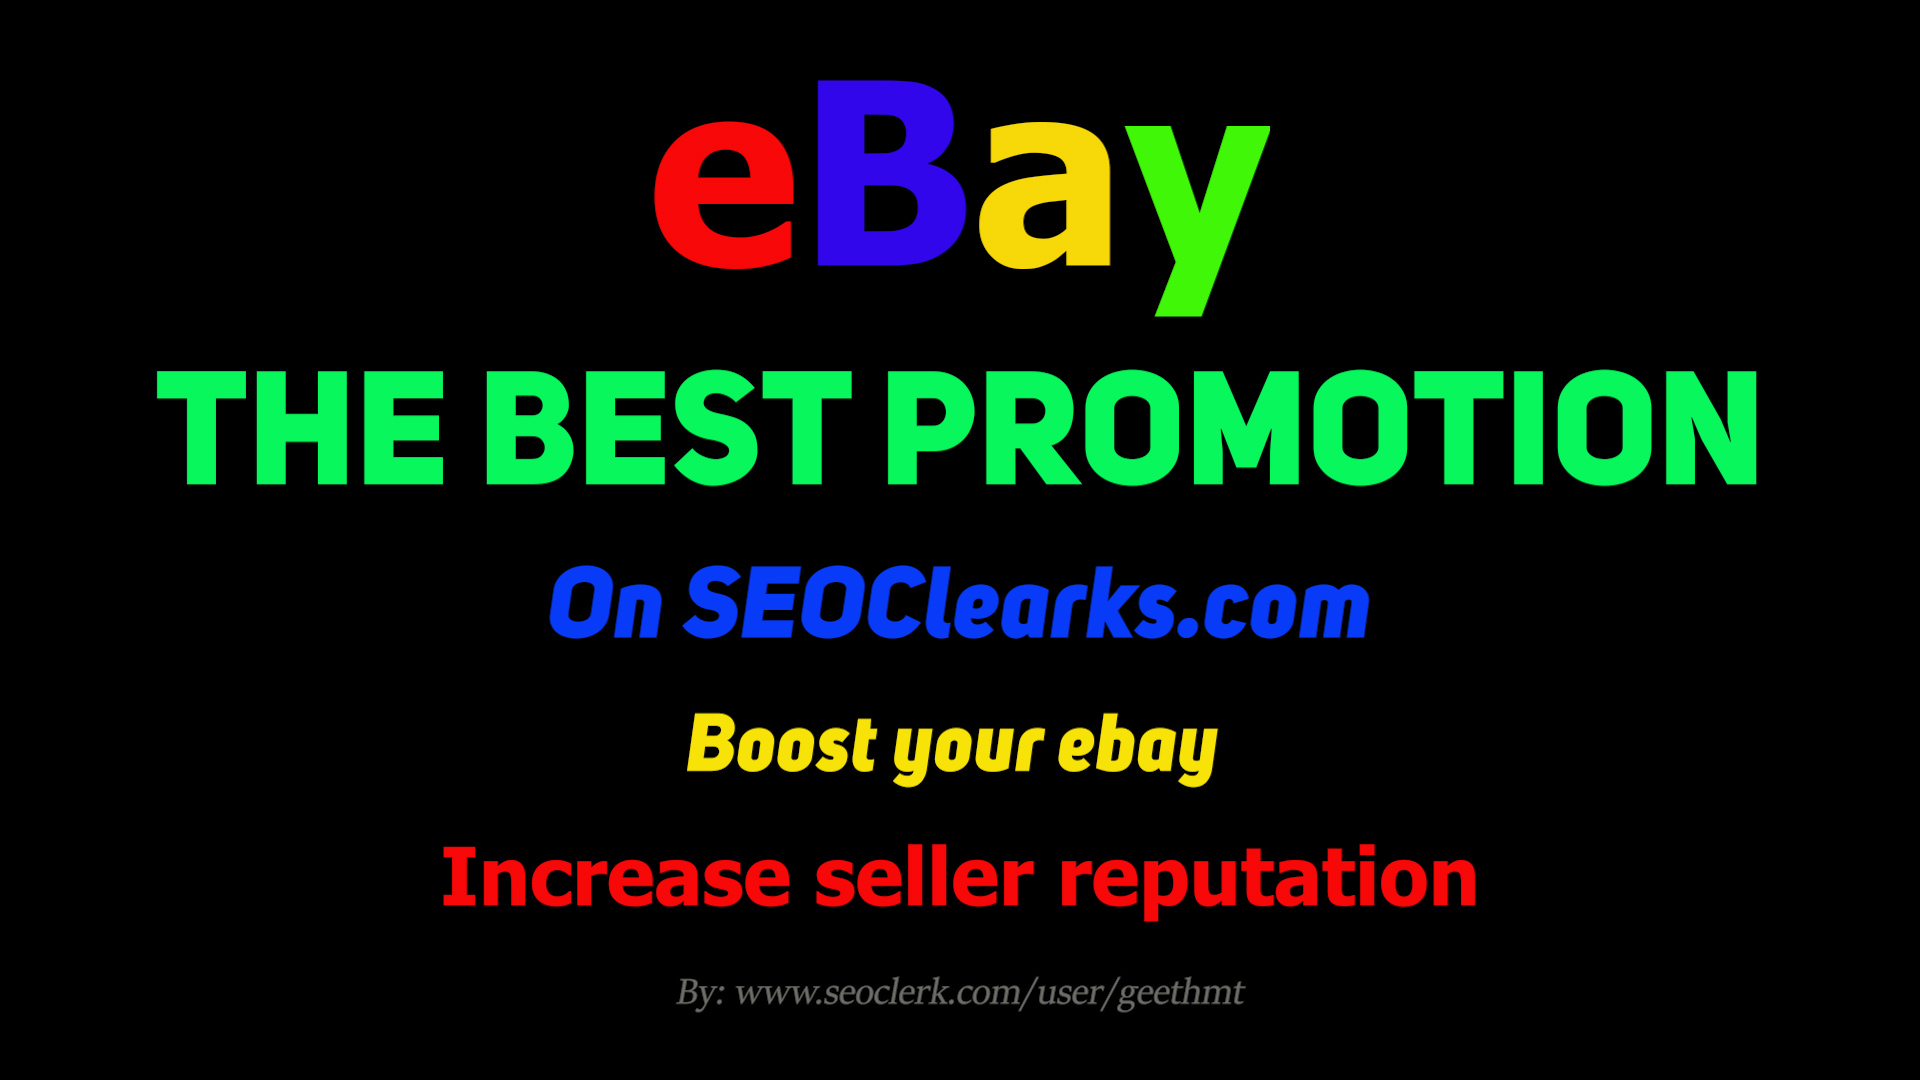 Promote your eBay store and boost sales by sending watchers, feedback and traffic